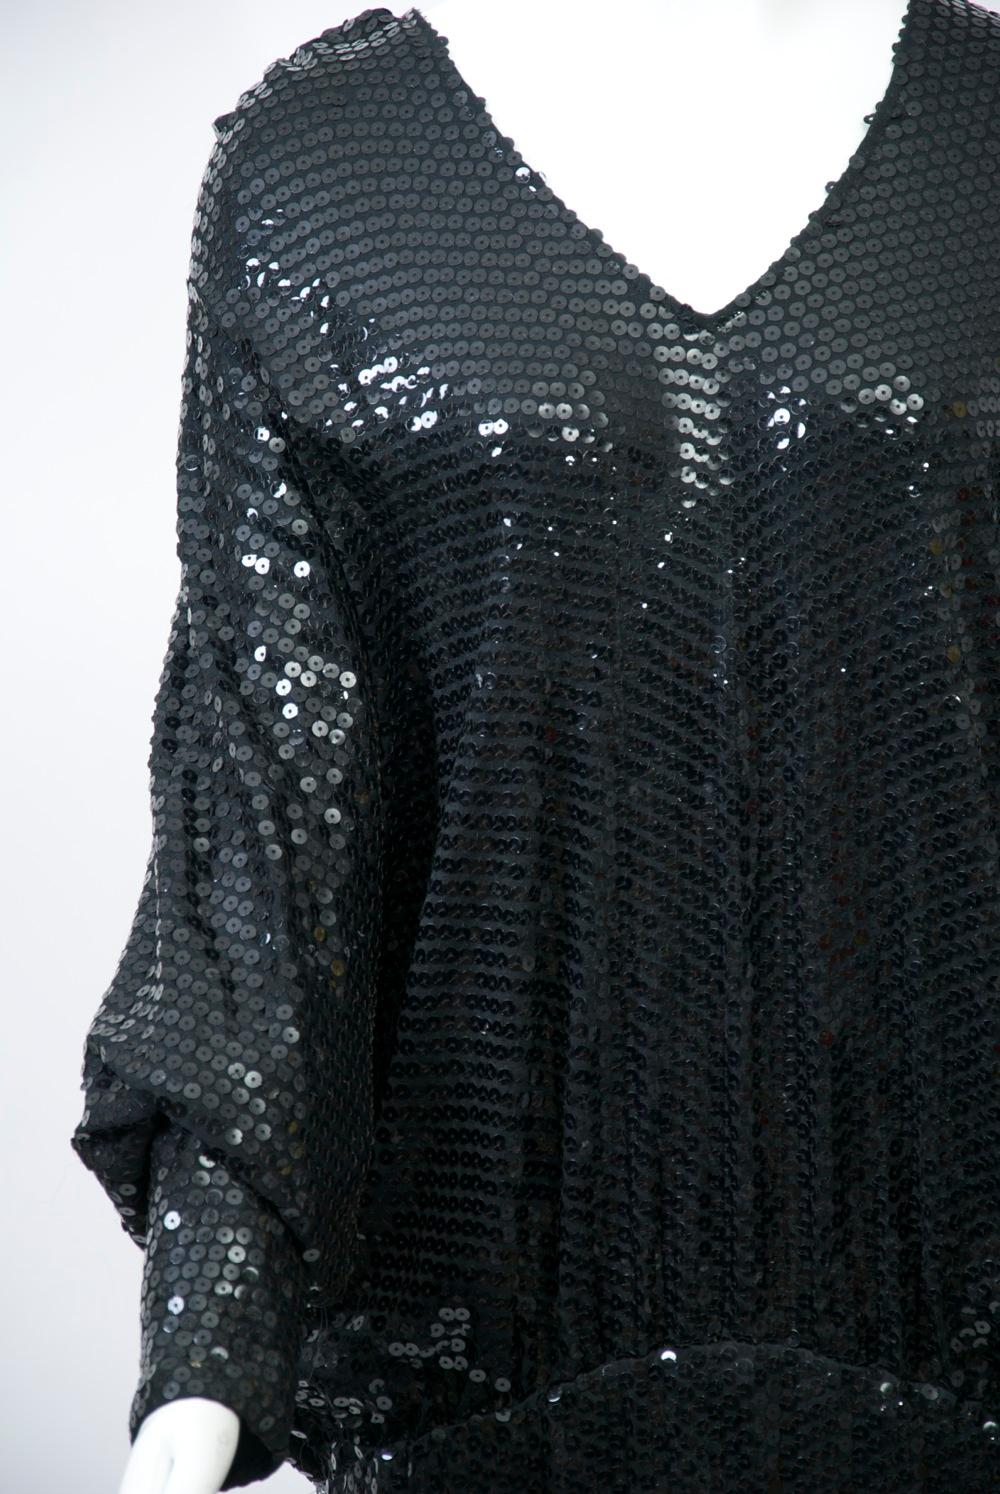 1980s black sequin blouson dress featuring a V neck, a narrow skirt with side slit, and deep cuffs terminating the long, loose sleeves. Elastic hip. Pulls over the head. Unlabeled. Flexible sizing 6-10.